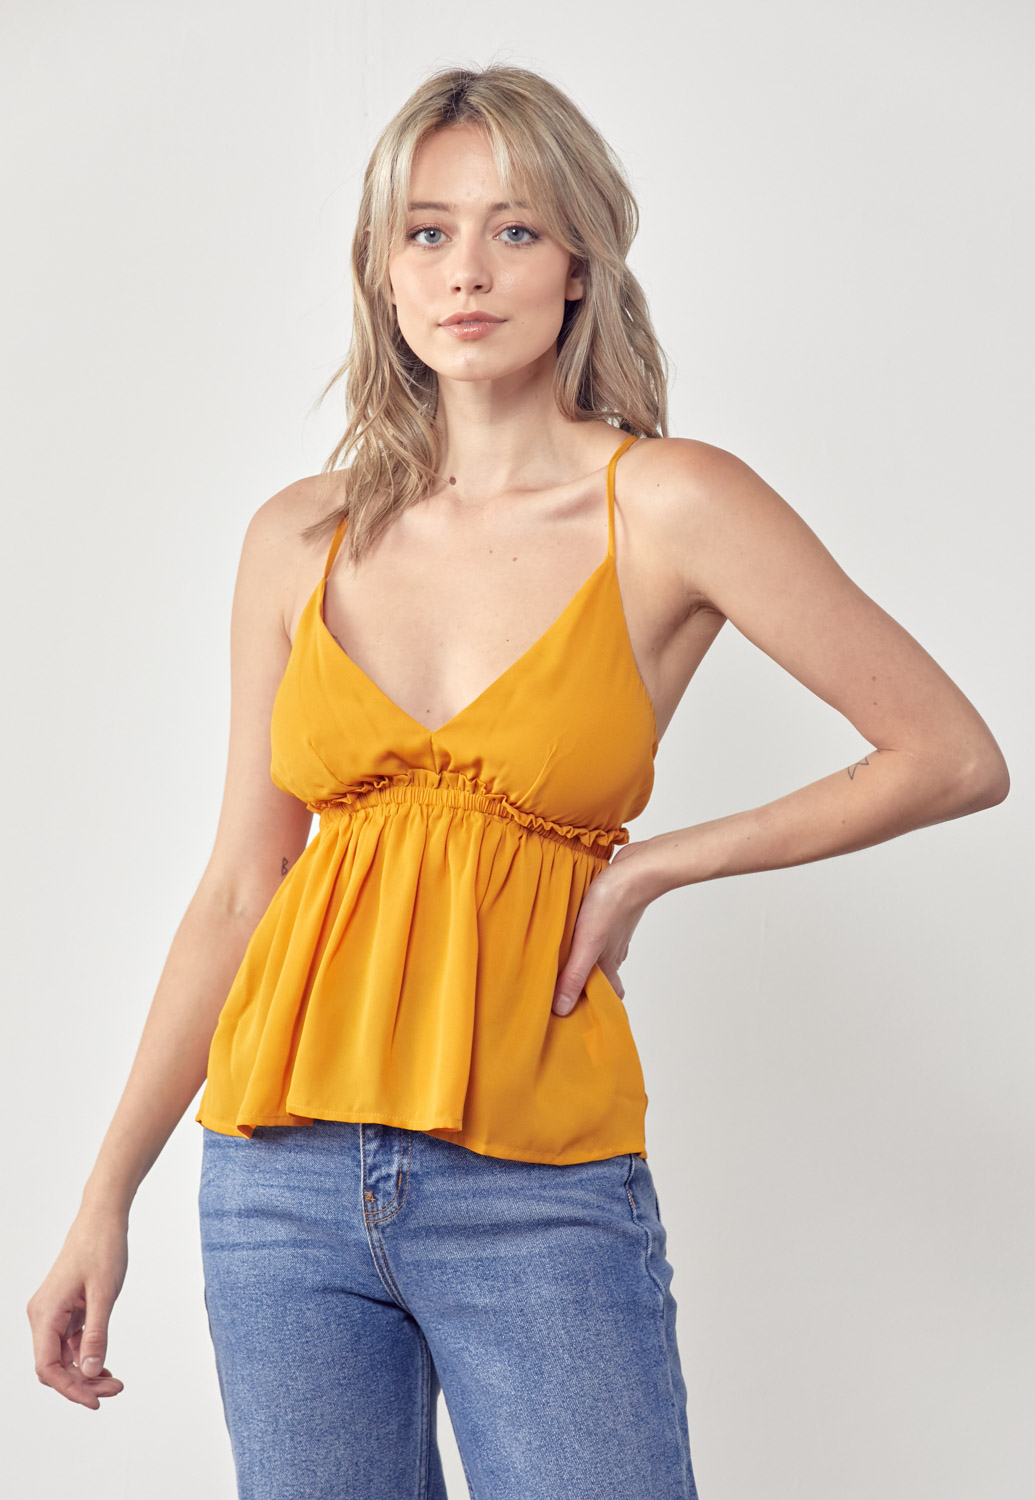 Back Lace Up Cami Top